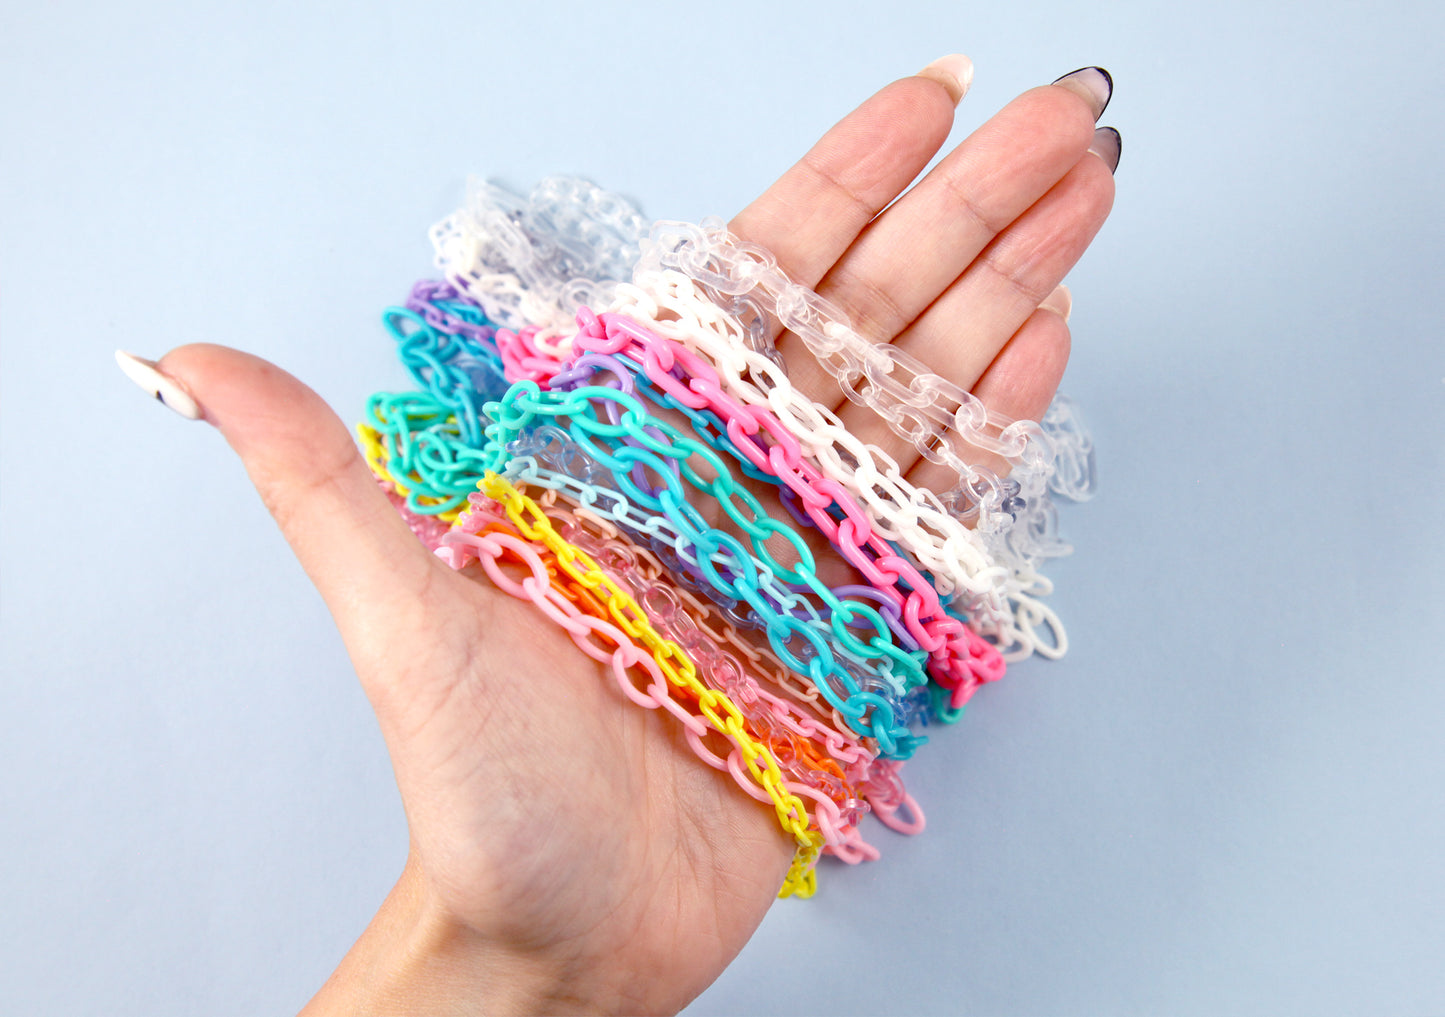 Plastic Chain Grab Bag - Mixed Lot of Acrylic Chains - great for necklaces, ispy, sensory crafts, phone straps - 20 pcs